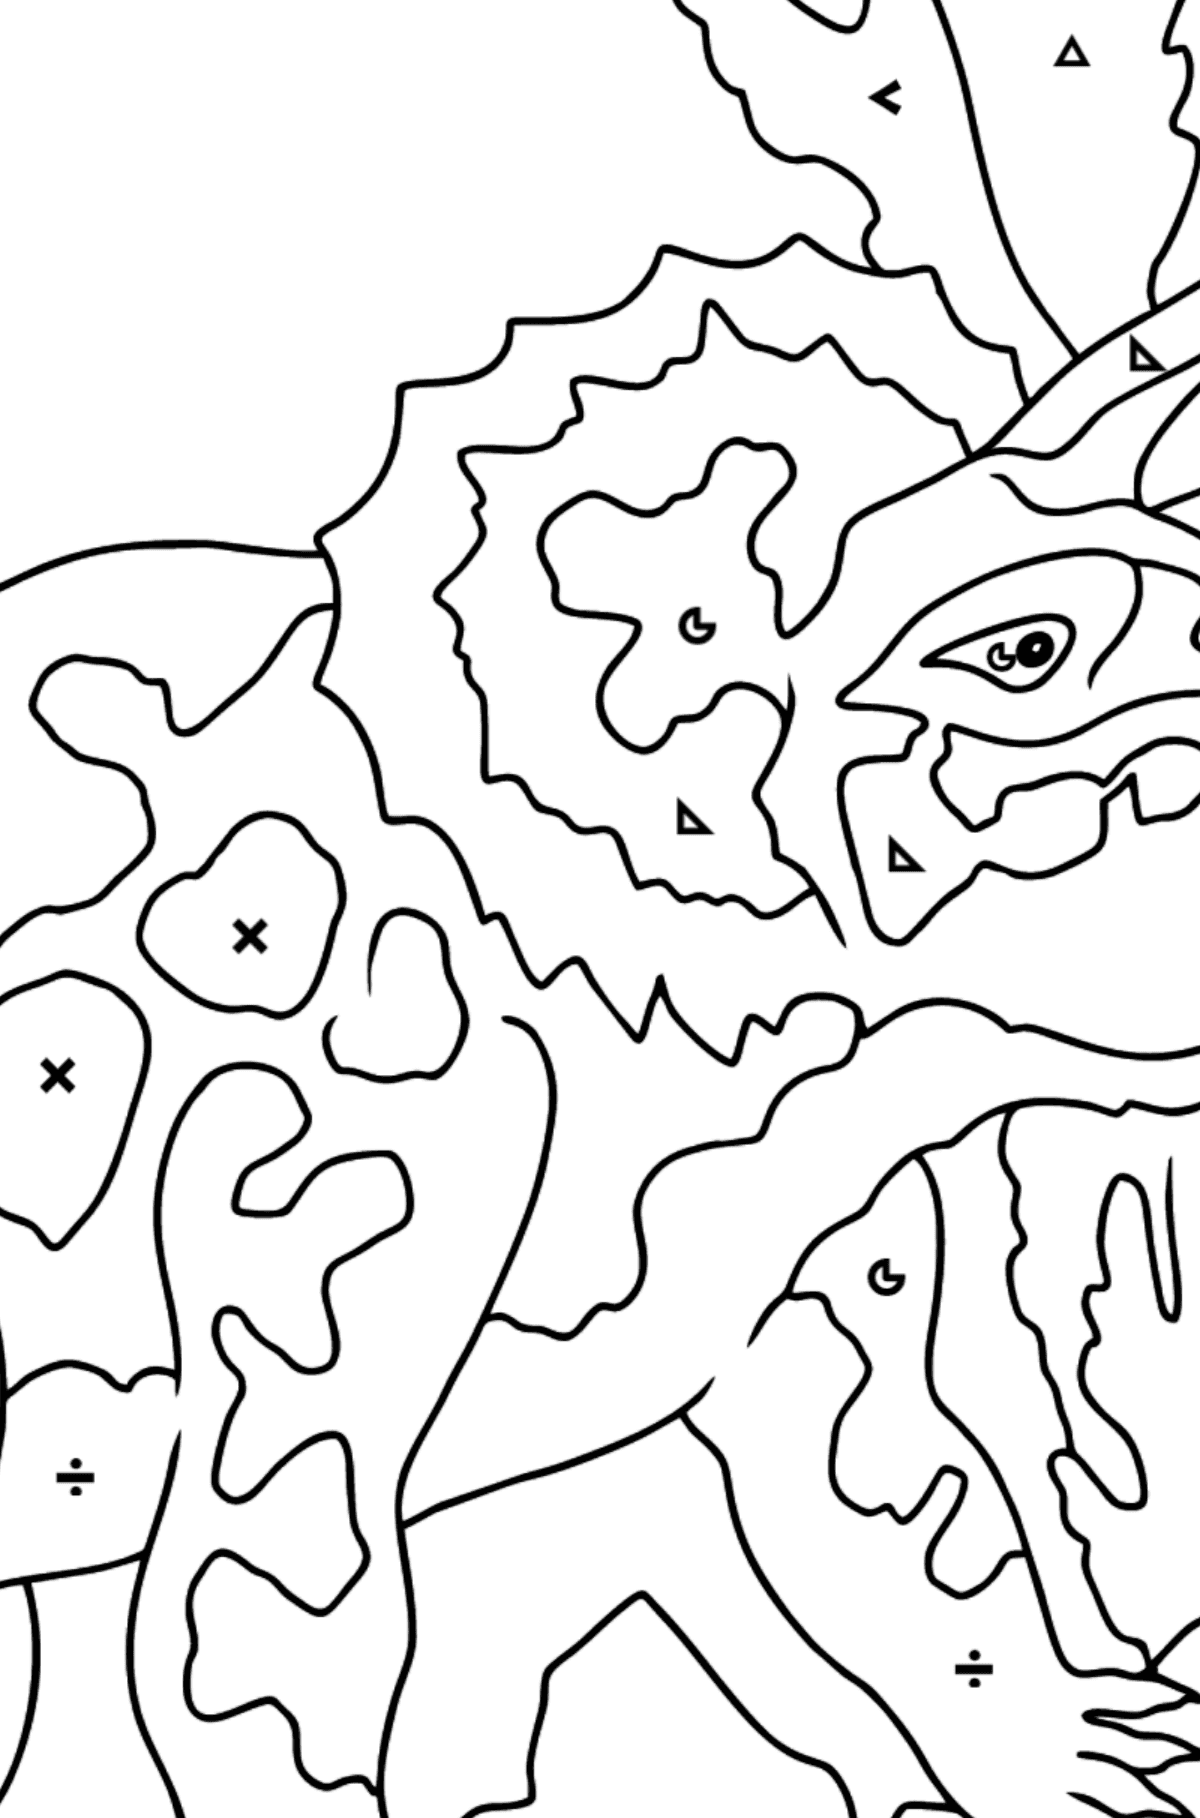 Coloring Page - Triceratops - A Peaceful Horned Dinosaur - Coloring by Symbols and Geometric Shapes for Kids